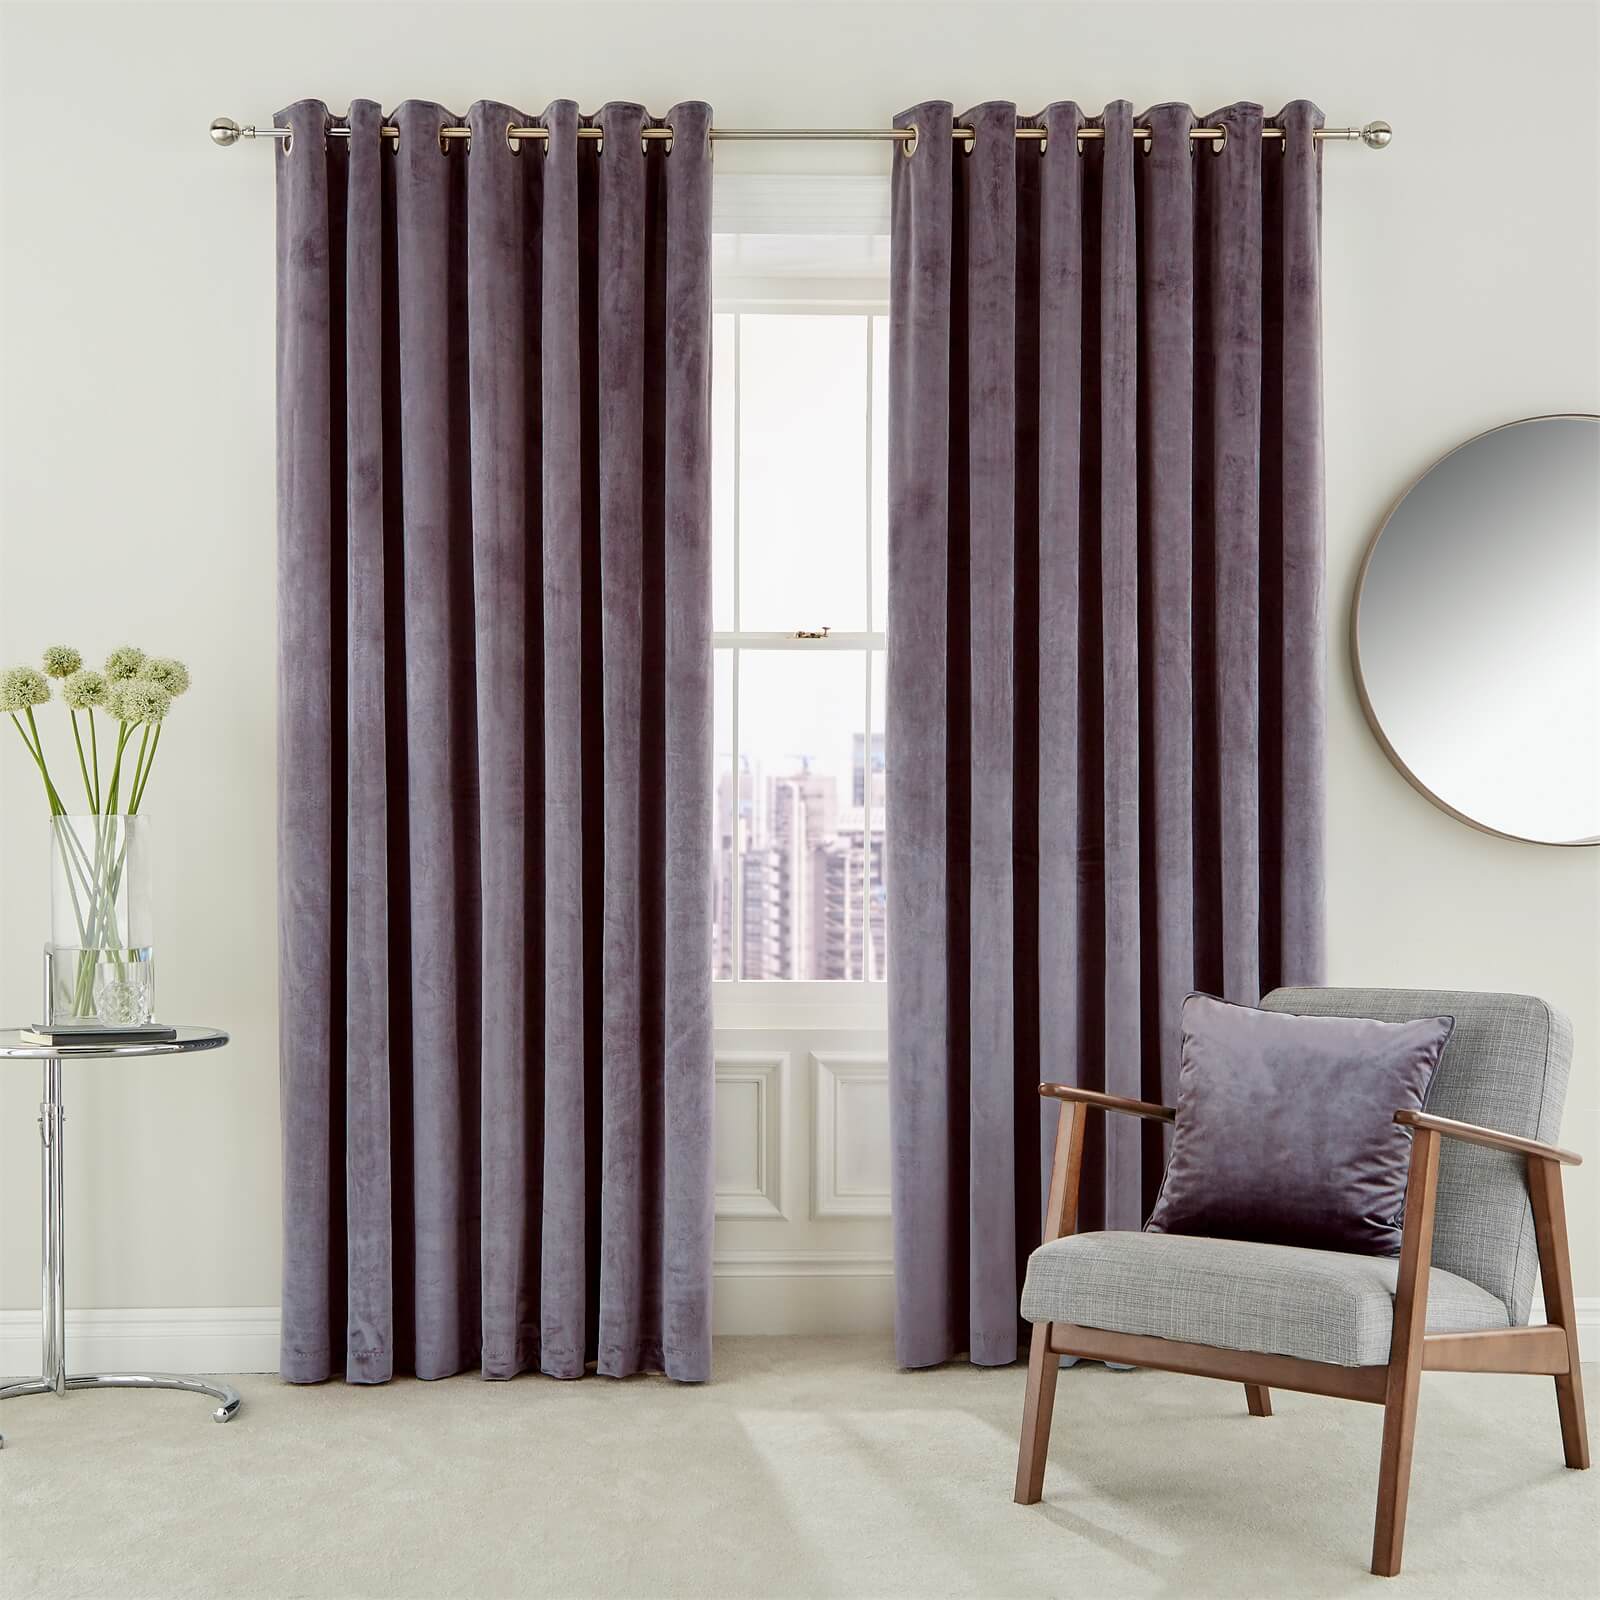 Peacock Blue Hotel Collection Escala Lined Curtains 66 x 54 - Damson